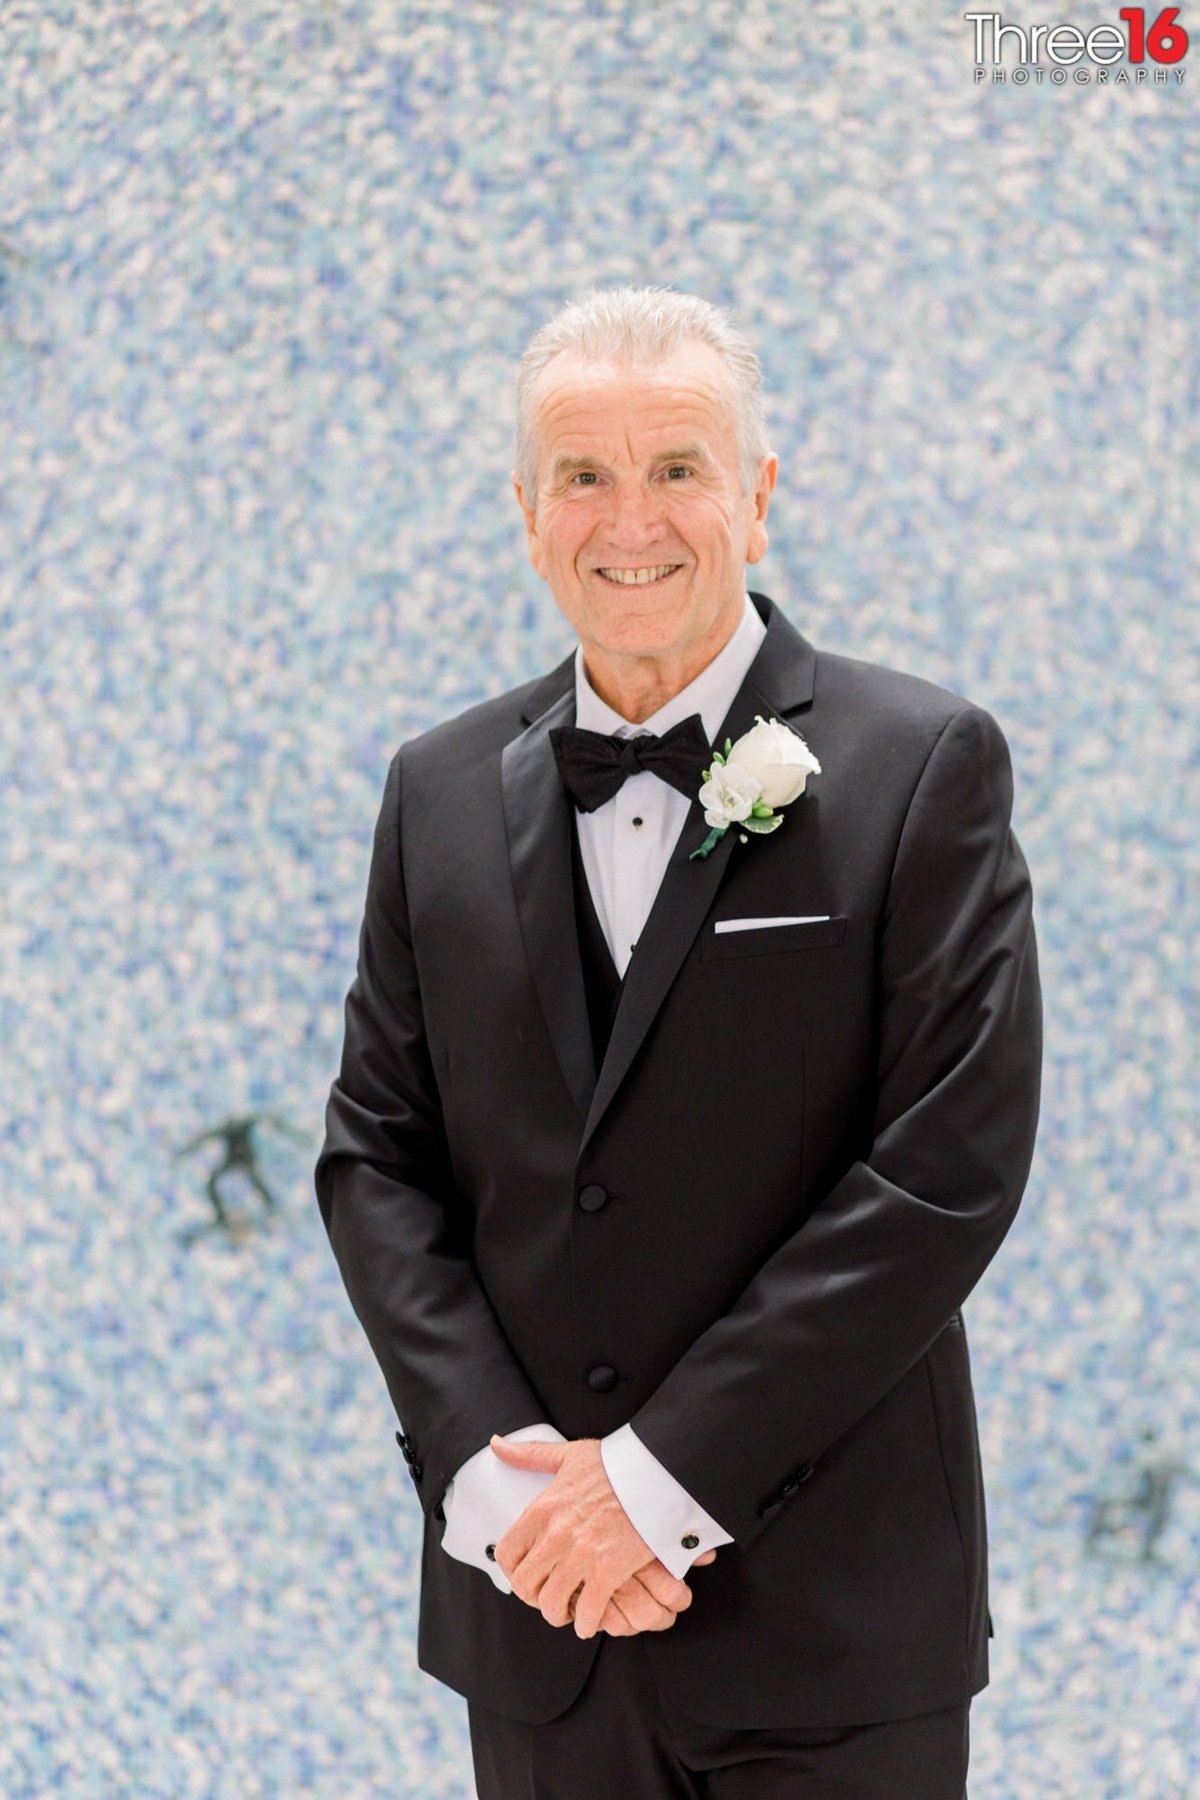 Groom poses with smile for the photographer